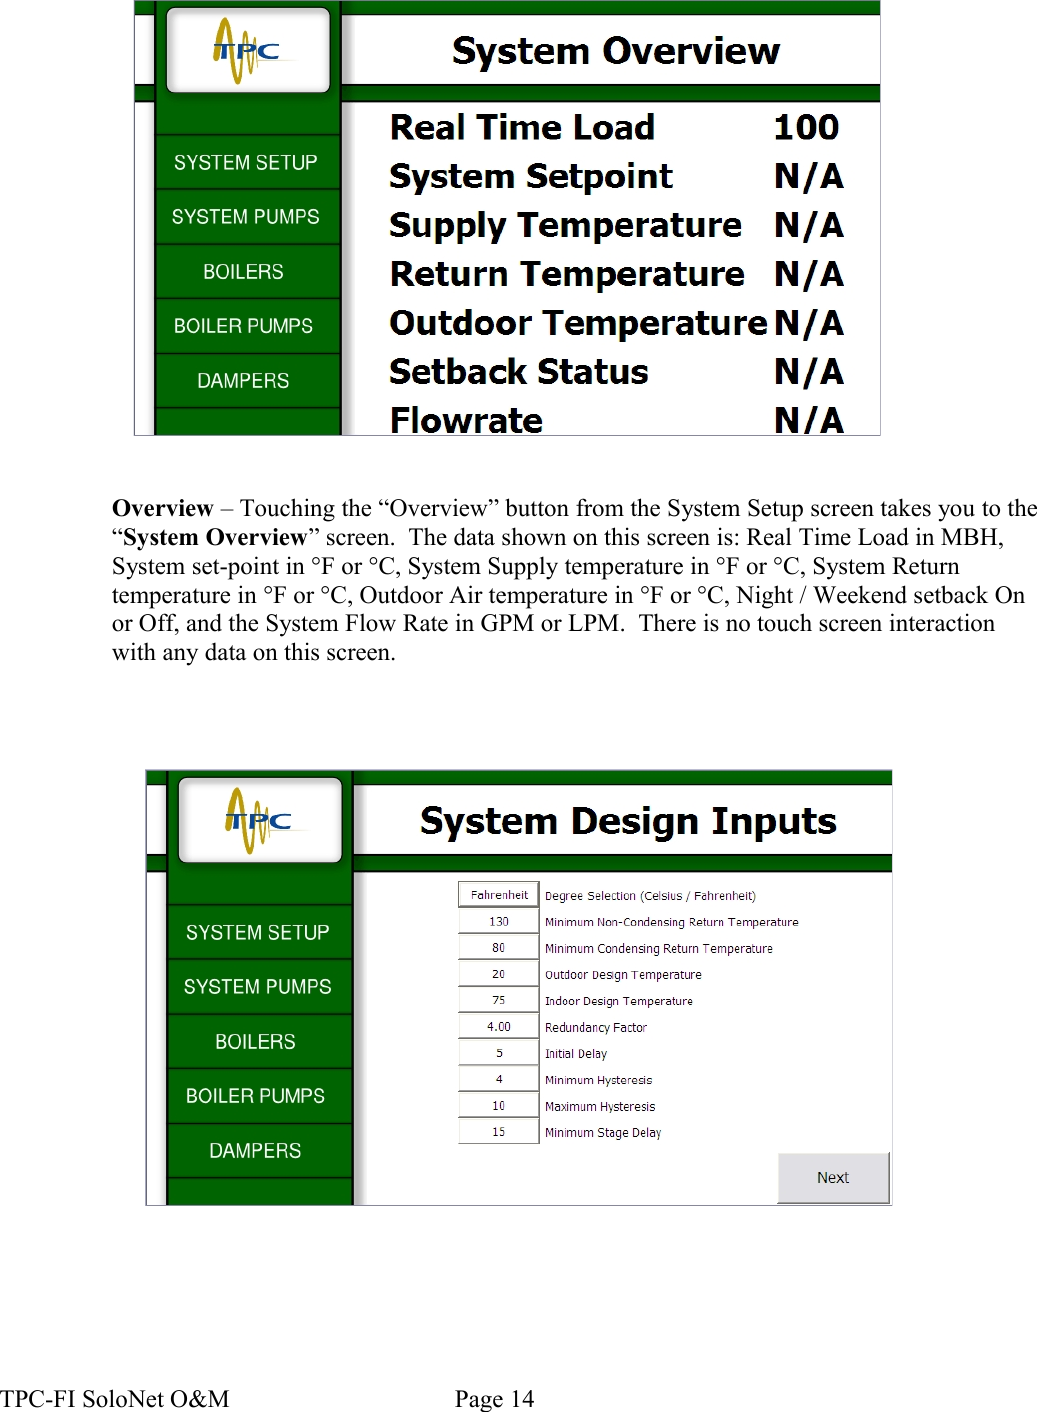 Overview – Touching the “Overview” button from the System Setup screen takes you to the “System Overview” screen.  The data shown on this screen is: Real Time Load in MBH, System set-point in °F or °C, System Supply temperature in °F or °C, System Return temperature in °F or °C, Outdoor Air temperature in °F or °C, Night / Weekend setback On or Off, and the System Flow Rate in GPM or LPM.  There is no touch screen interaction with any data on this screen.TPC-FI SoloNet O&amp;M                                    Page 14